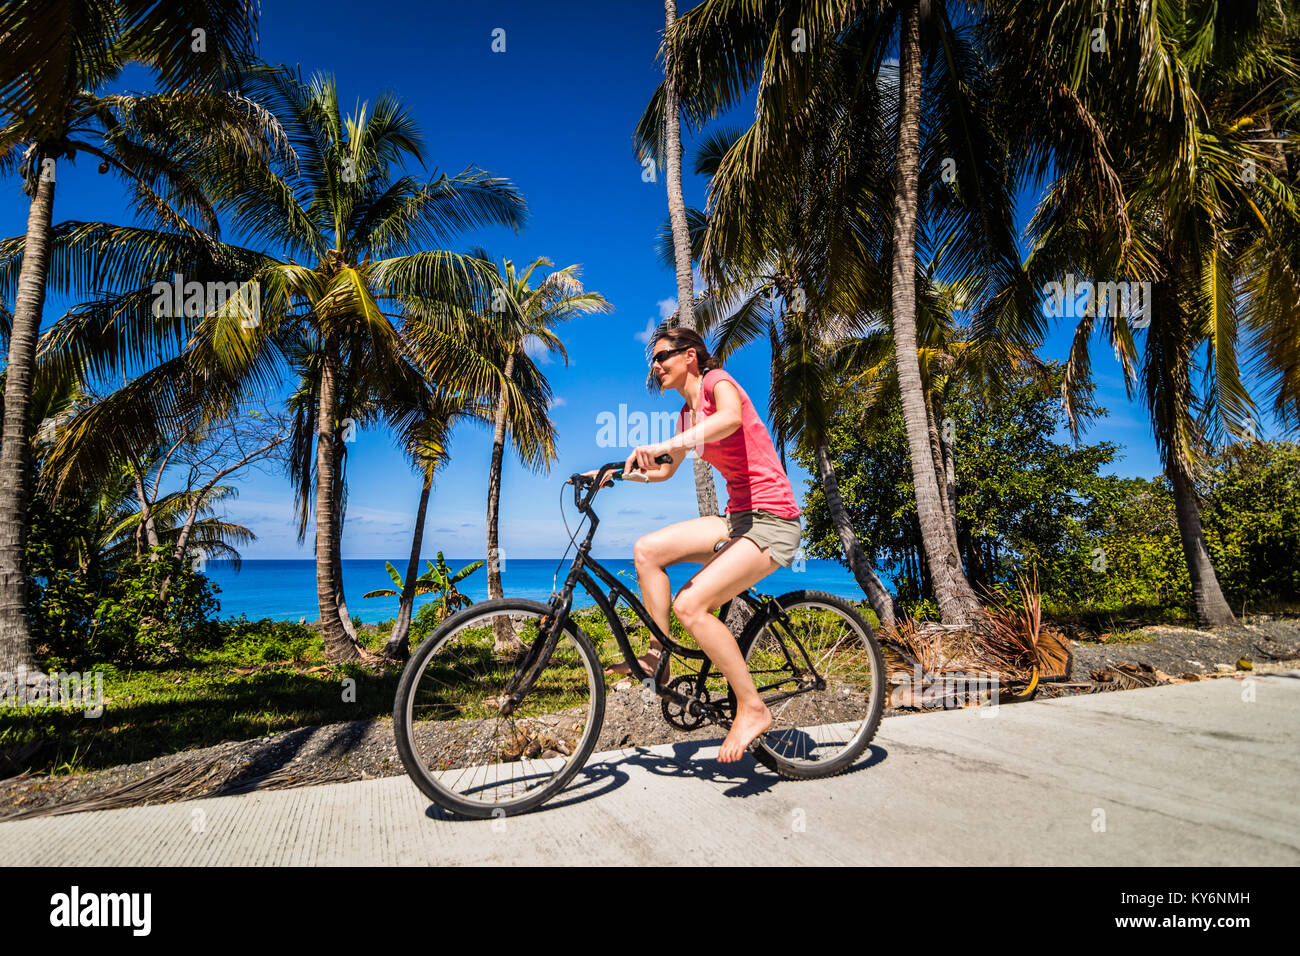 SAN ANDRES ISLAND, Colombia   Circa March 2017. Woman Bicycling Bare Foot in the Street in the Caribbean Stock Photo